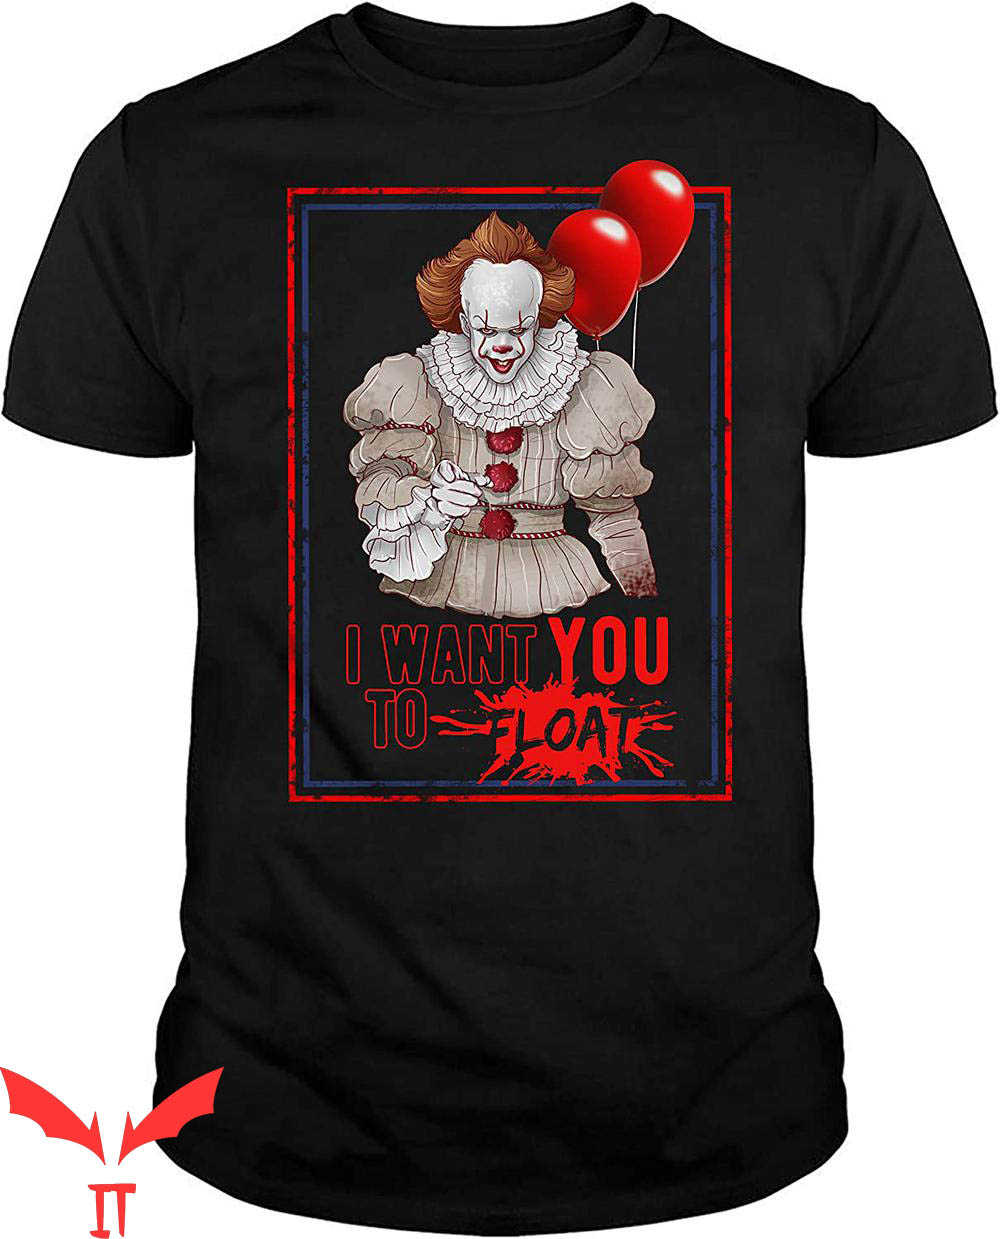 We All Float Down Here T-Shirt Clown Red Balloon Halloween